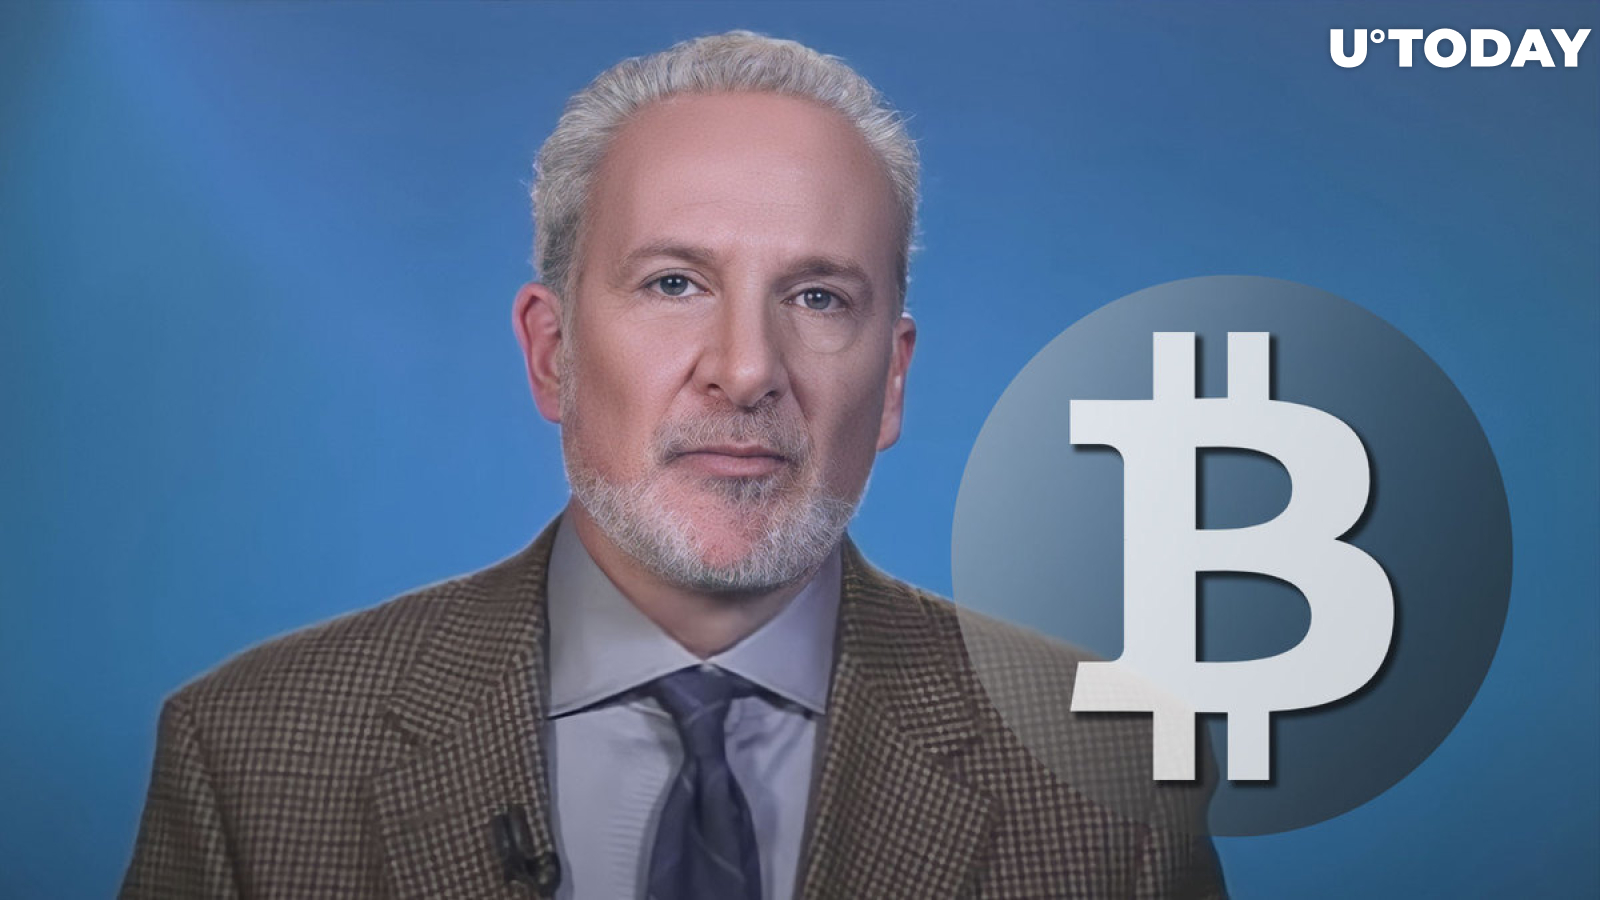 Peter Schiff Says Bitcoin U-Turn Claims Are Lies